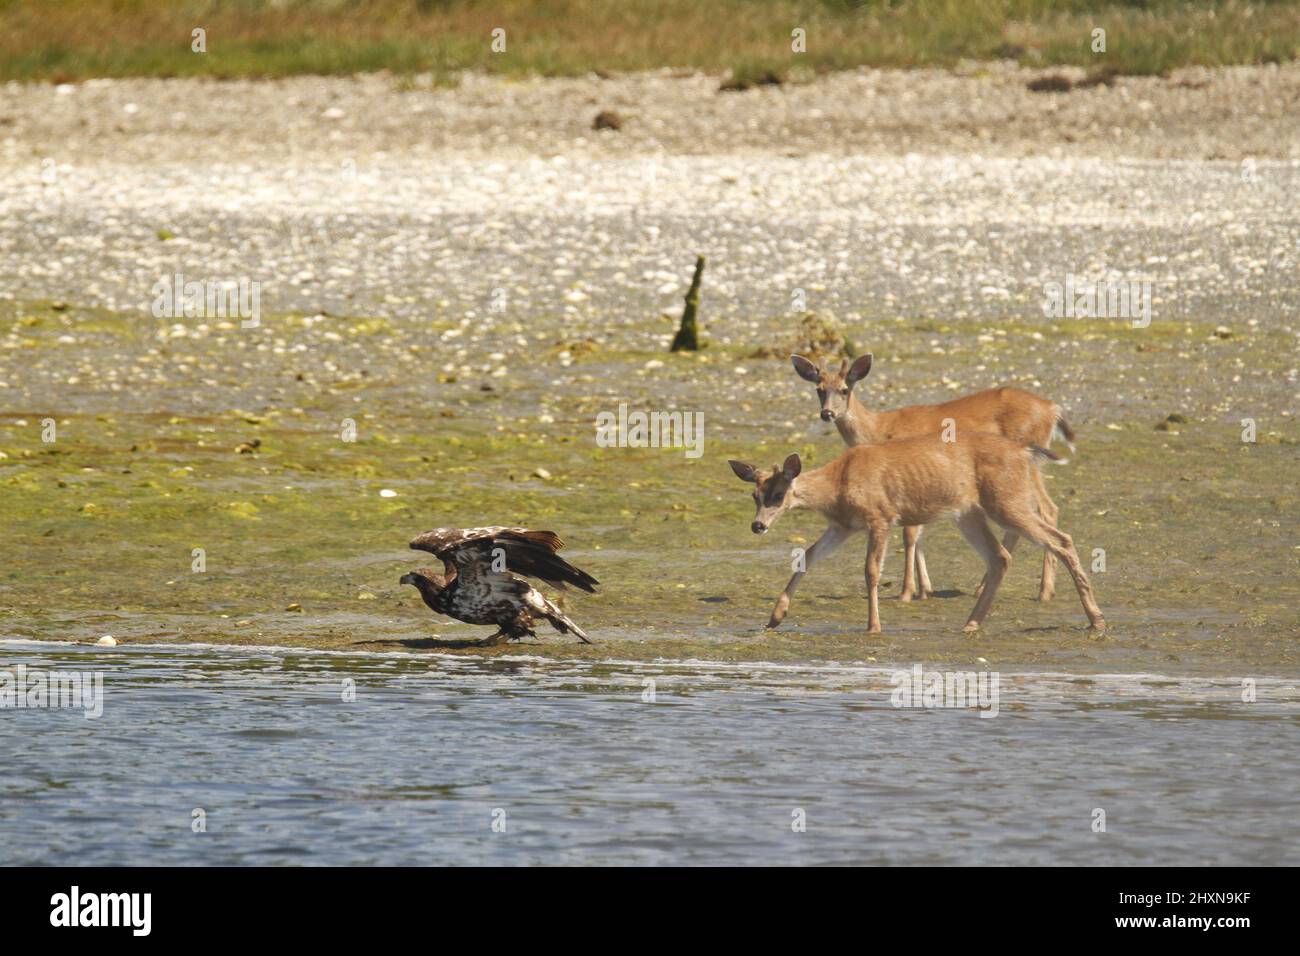 A juvenile Bald Eagle being chased away by a pair of deer on the beach. Taken in Ucluelet, British Columbia, Canada. Stock Photo